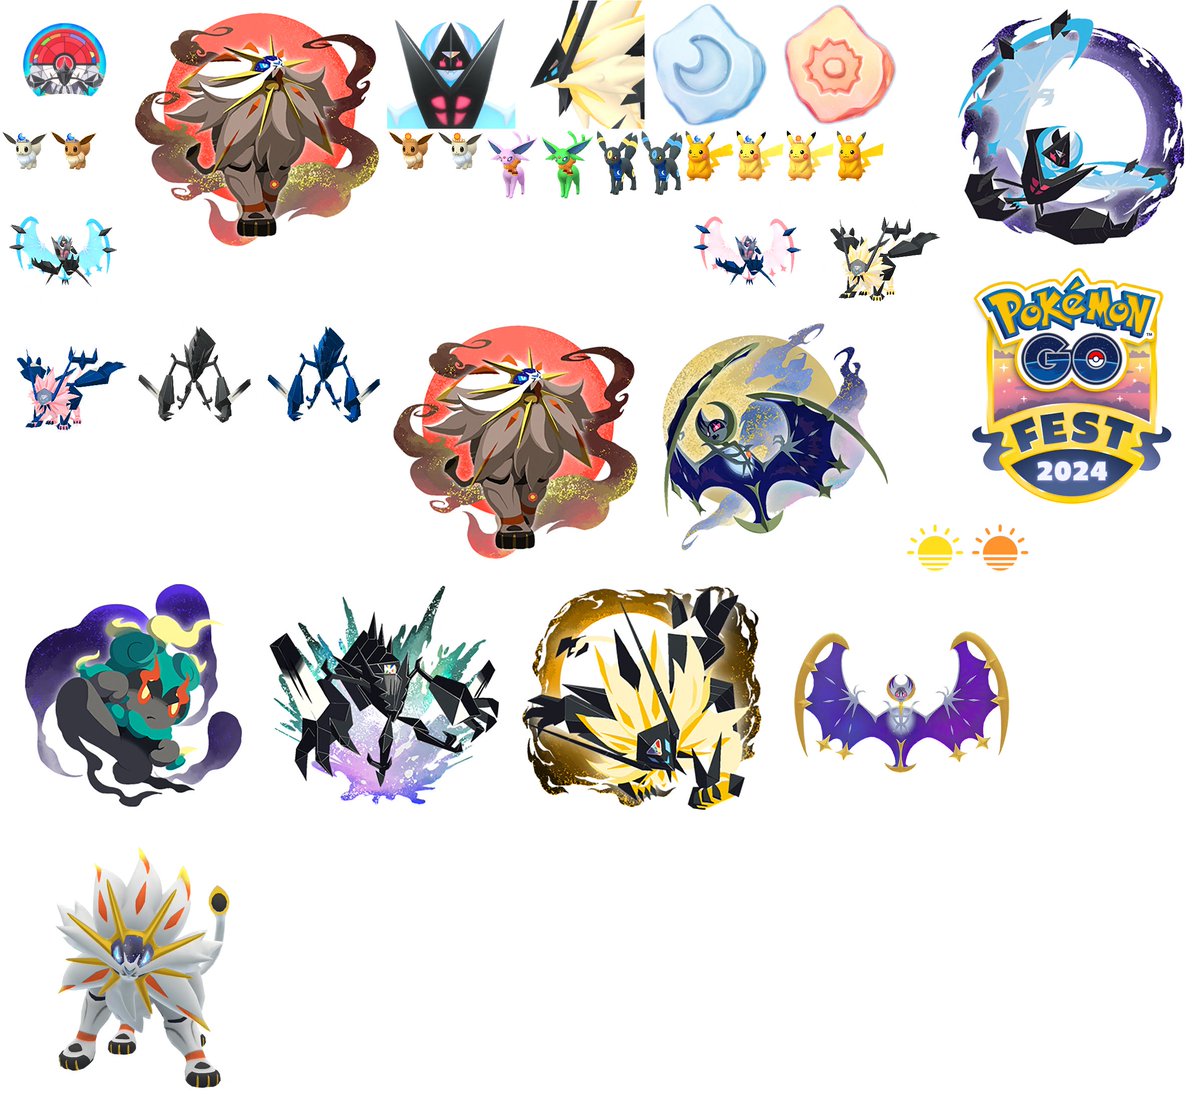 Random GO Fest 2024 visual assets, including stickers, textures, Pokémon sprites, new items, Dusk Mane and Dawn Wing portraits, confetti, and that's pretty much it. Useful for content creation!